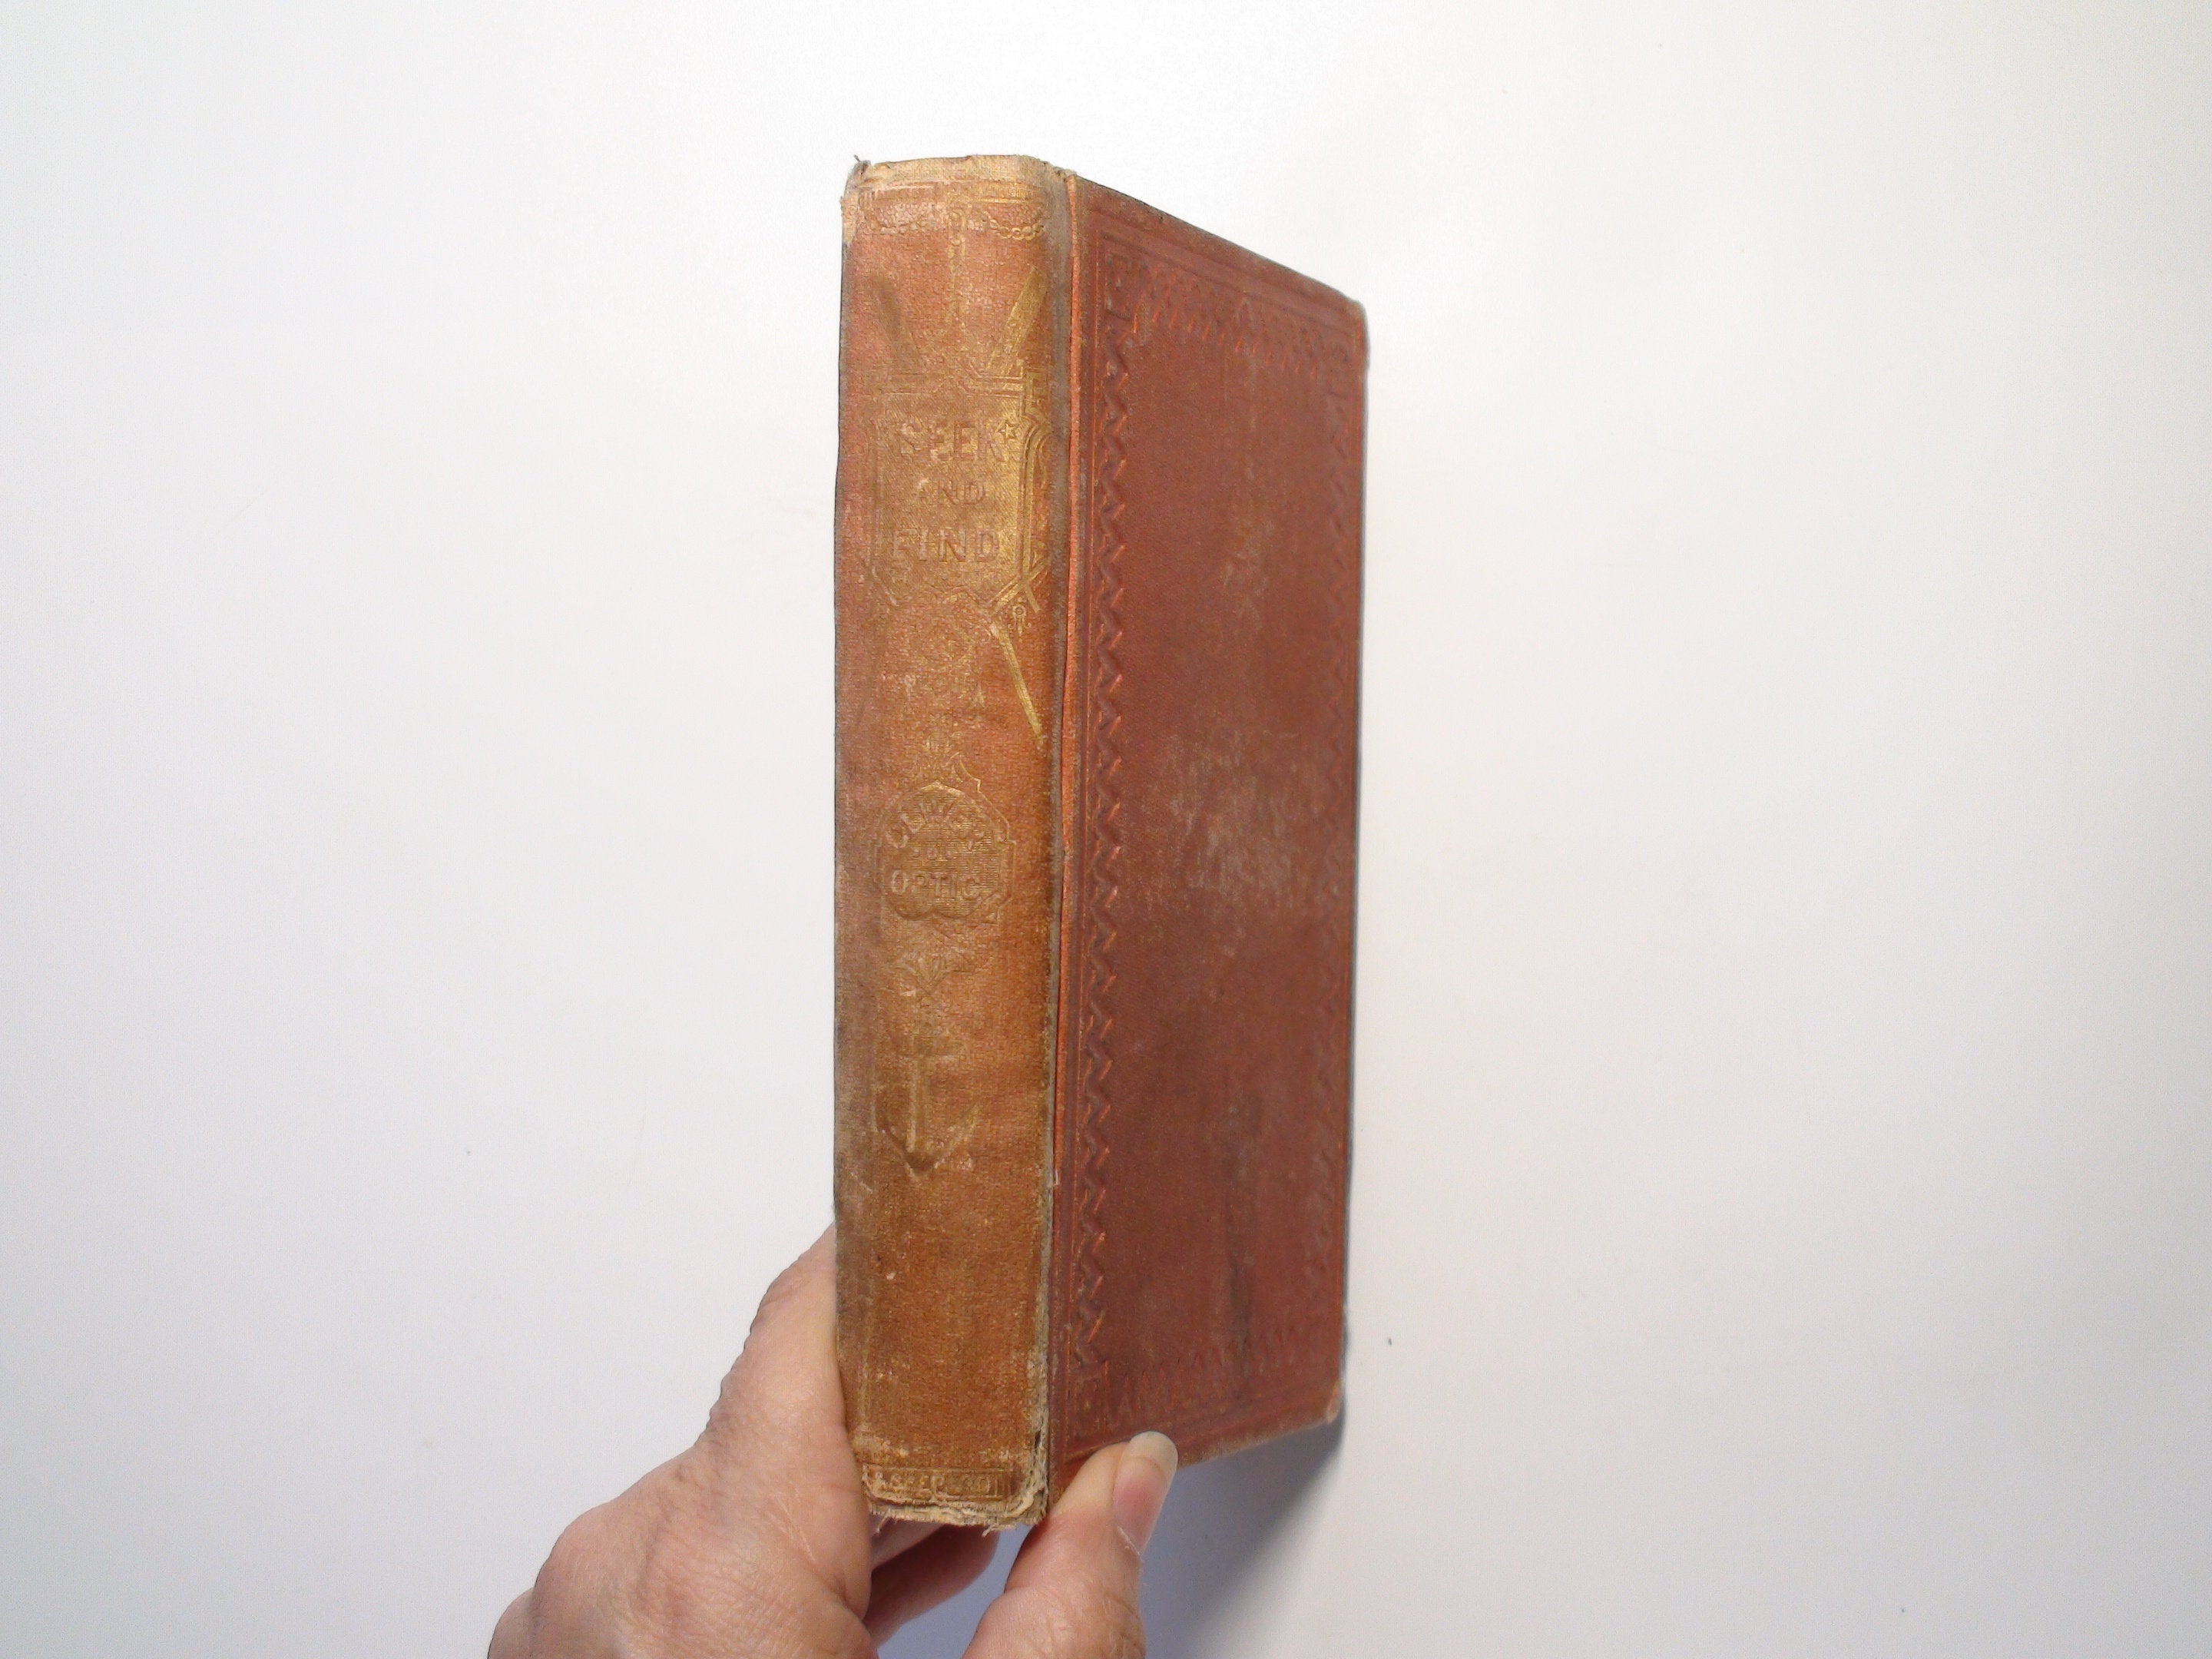 Seek and Find, by Oliver Optic, Illustrated, 1st Ed, Uncommon, 1868